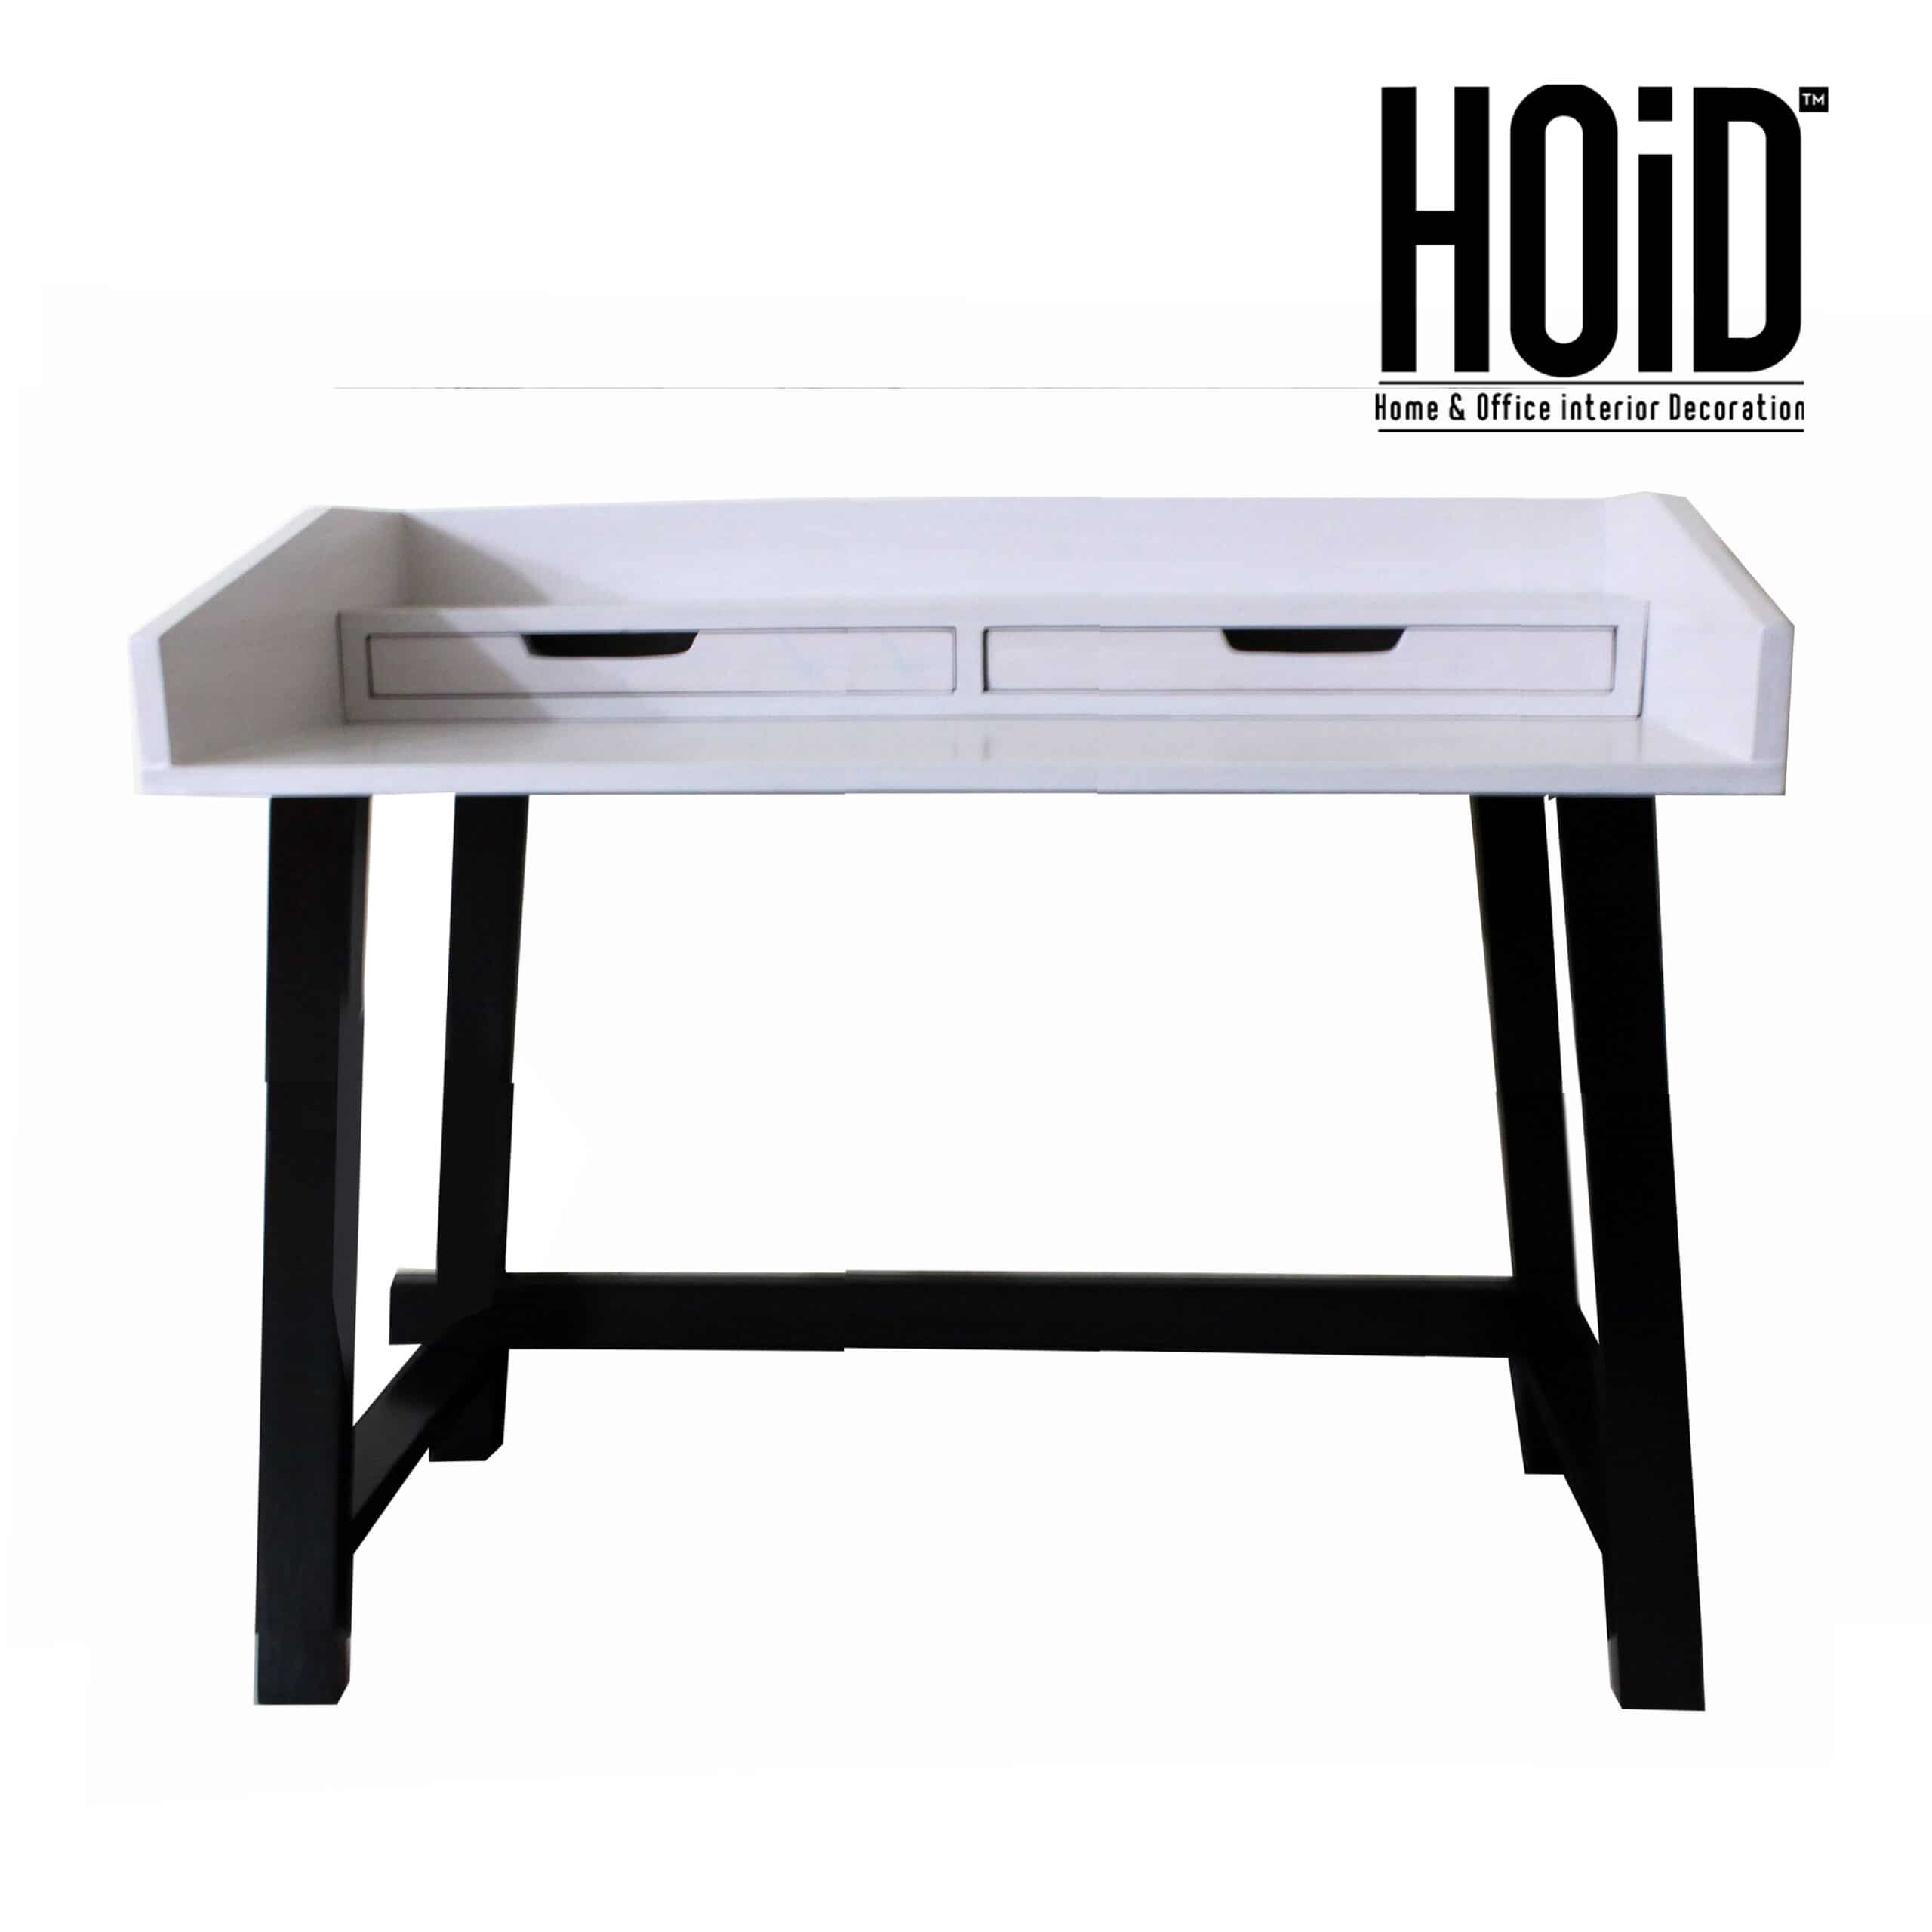 dio-table-for-6-9-age-scaled-2.jpg